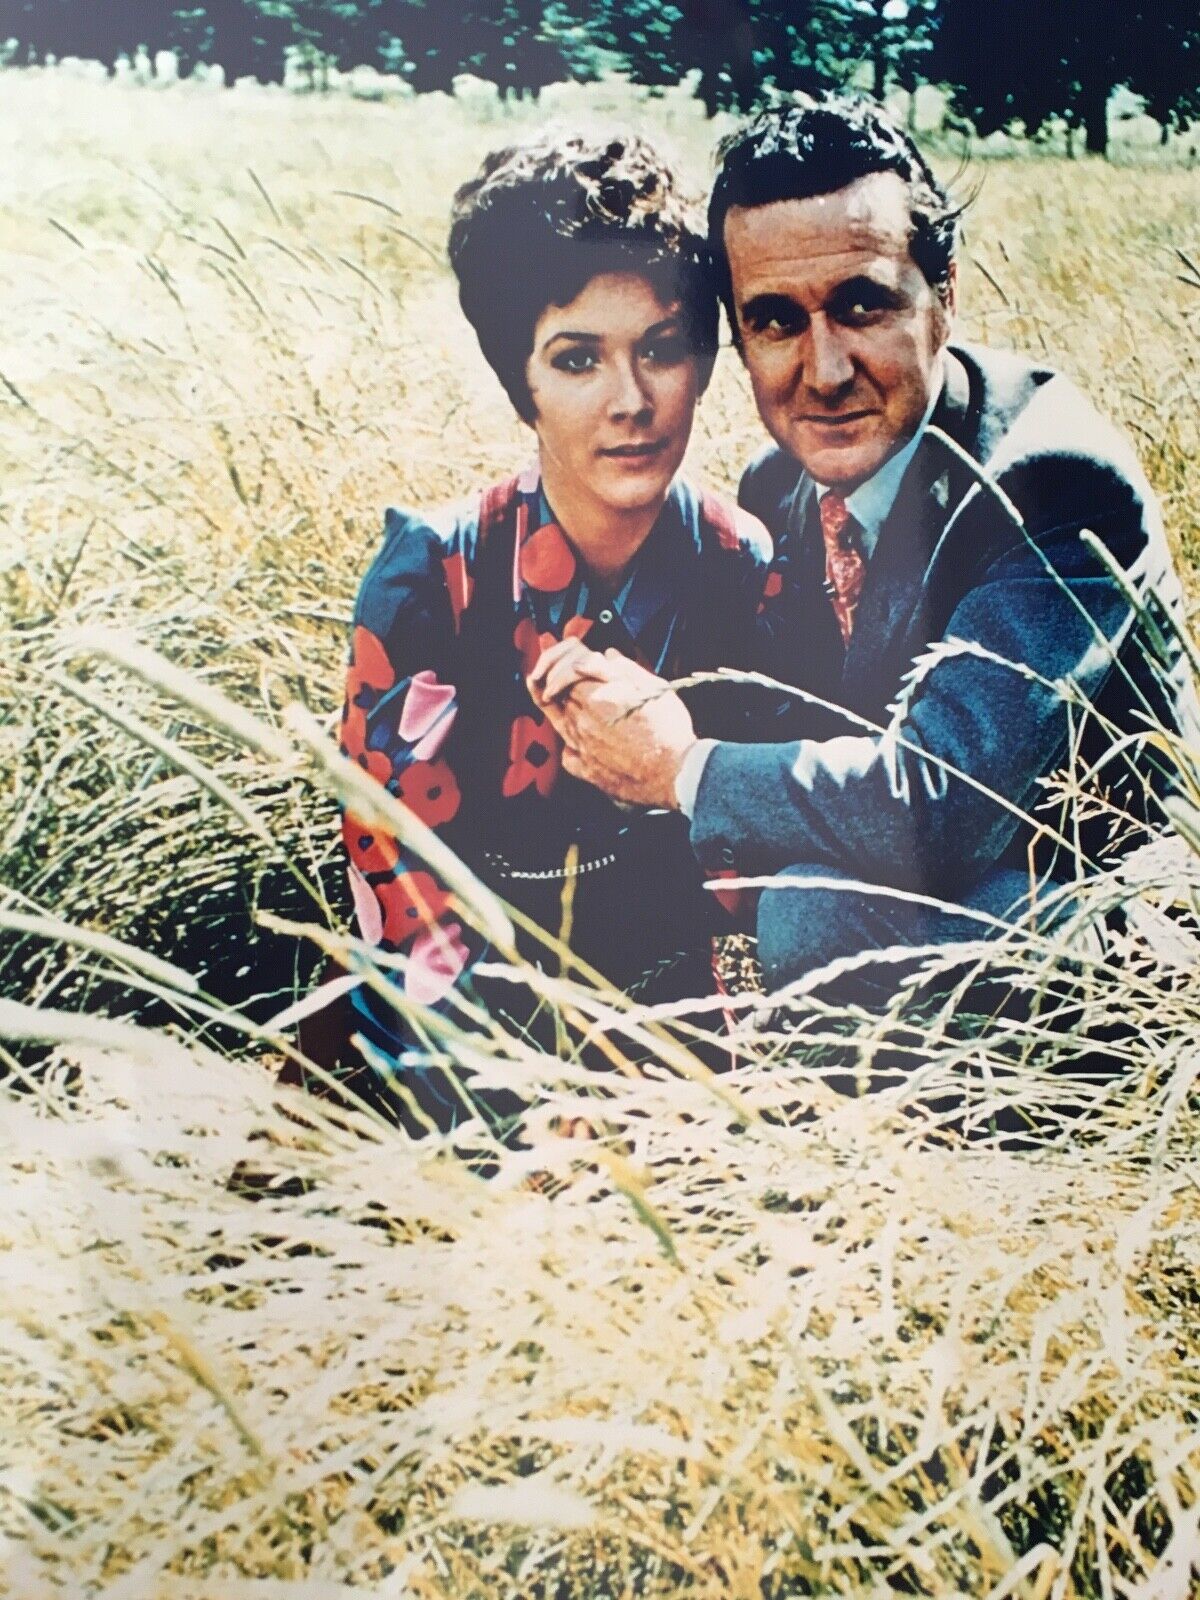 LINDA THORSON / PATRICK MACNEE - THE AVENGERS - EXCELLENT UNSIGNED Photo Poster painting